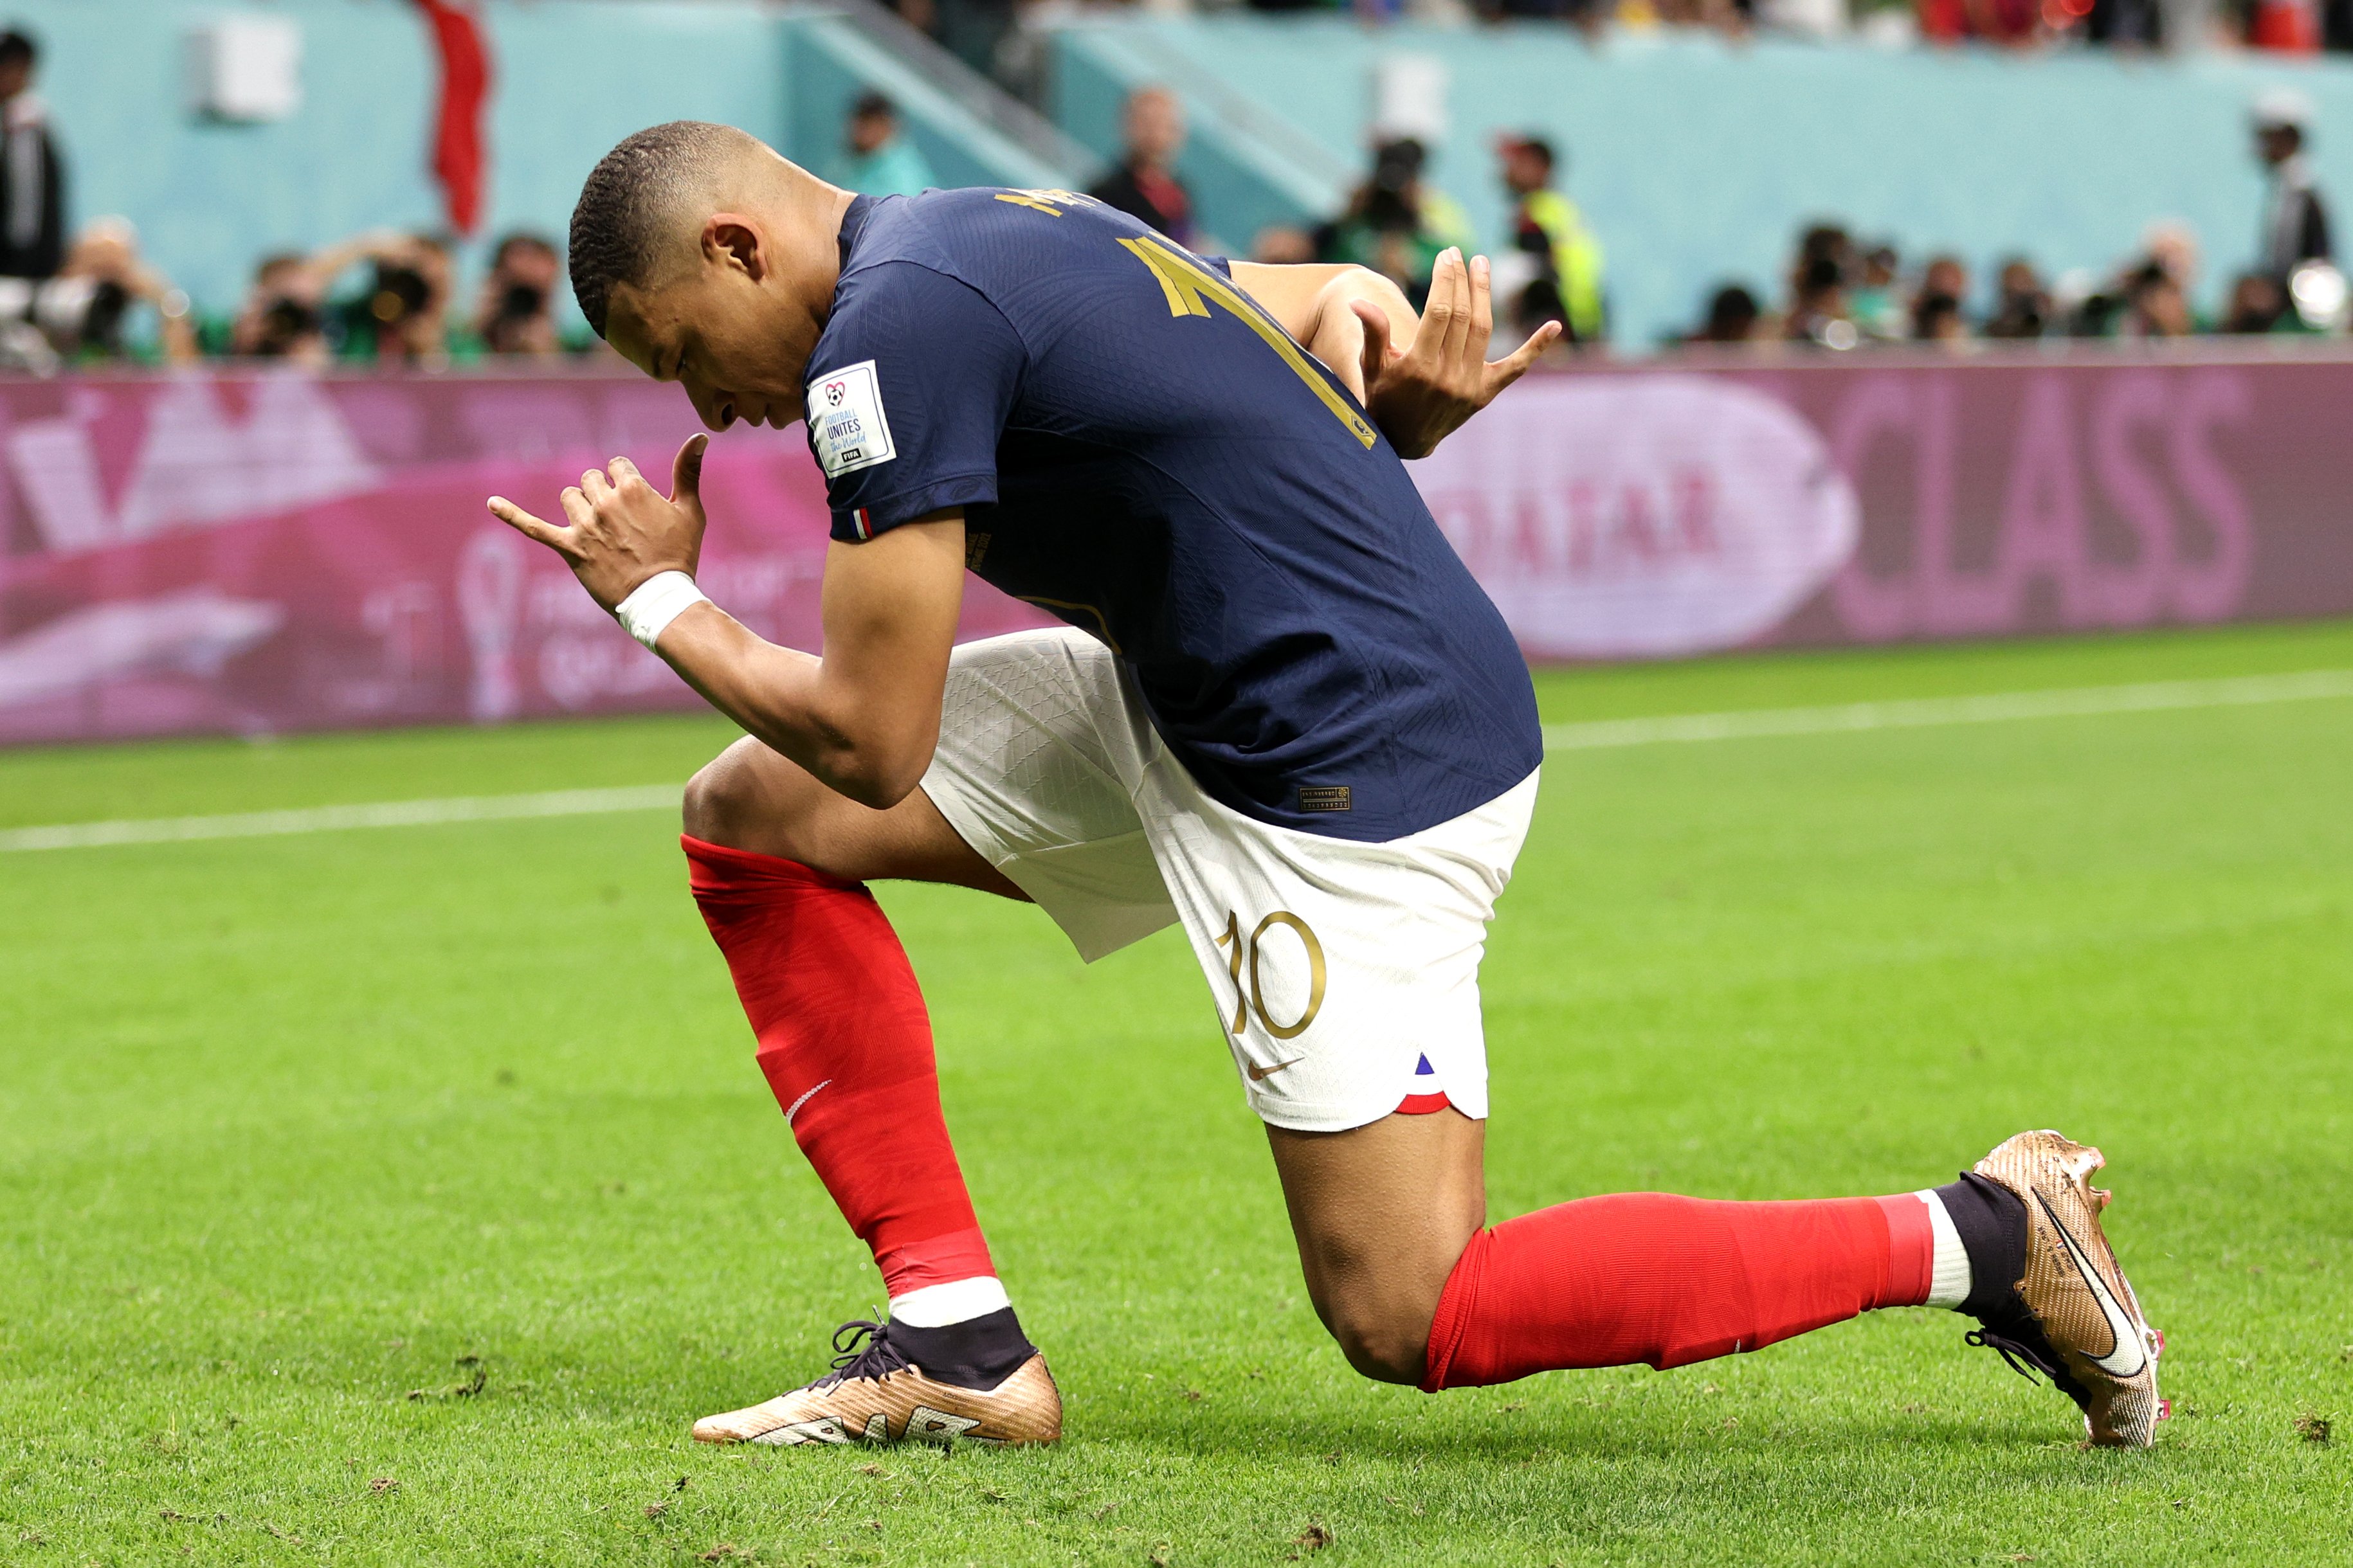 Fifa Wc Golden Boot Kylian Mbappe Pips Lionel Messi To Win Golden Boot Race With Stunning Wc